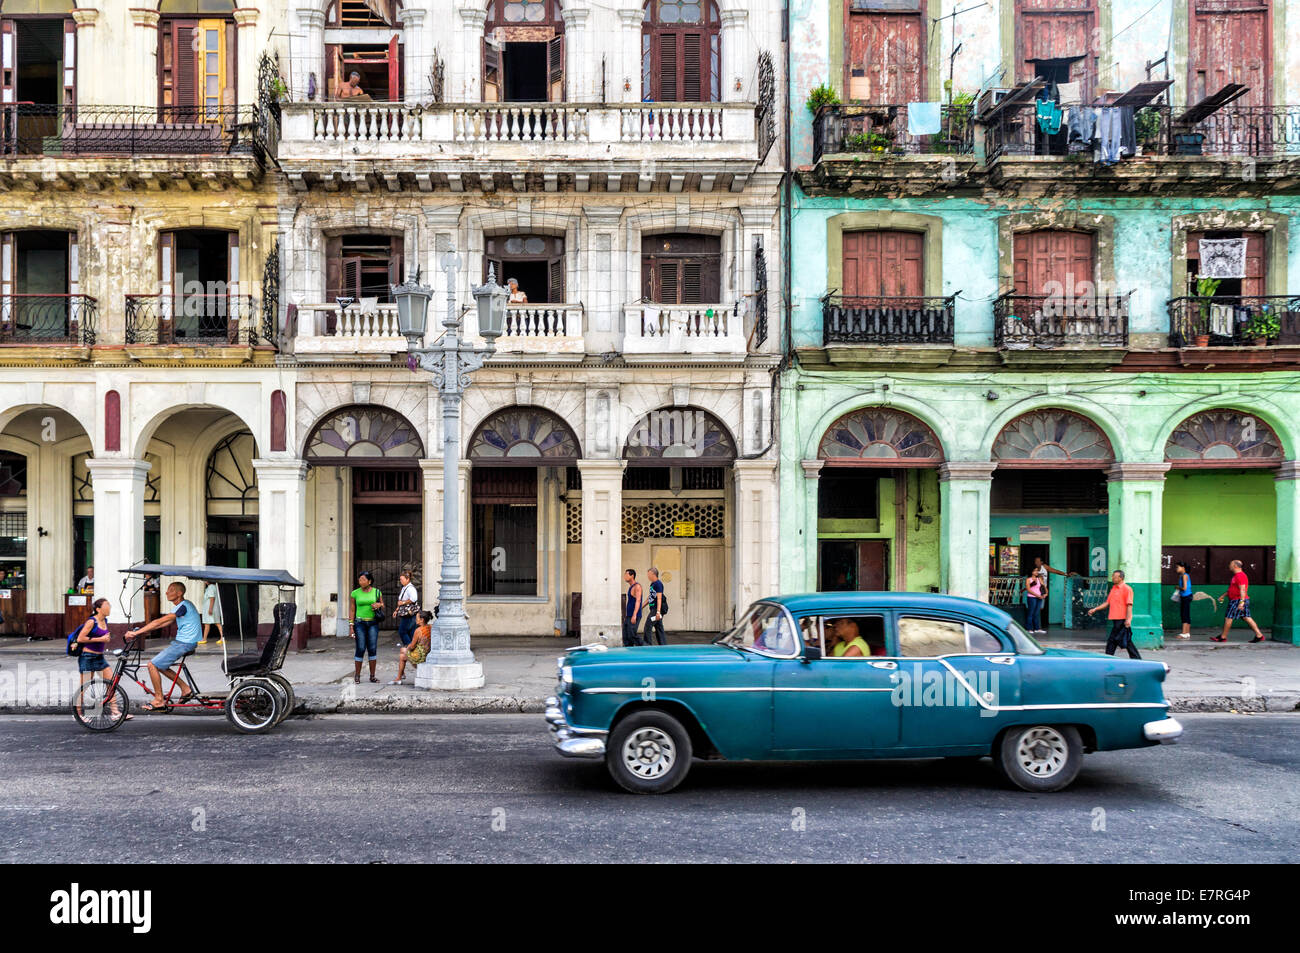 Street scene with vintage car and worn out buildings in Havana, Cuba. Stock Photo